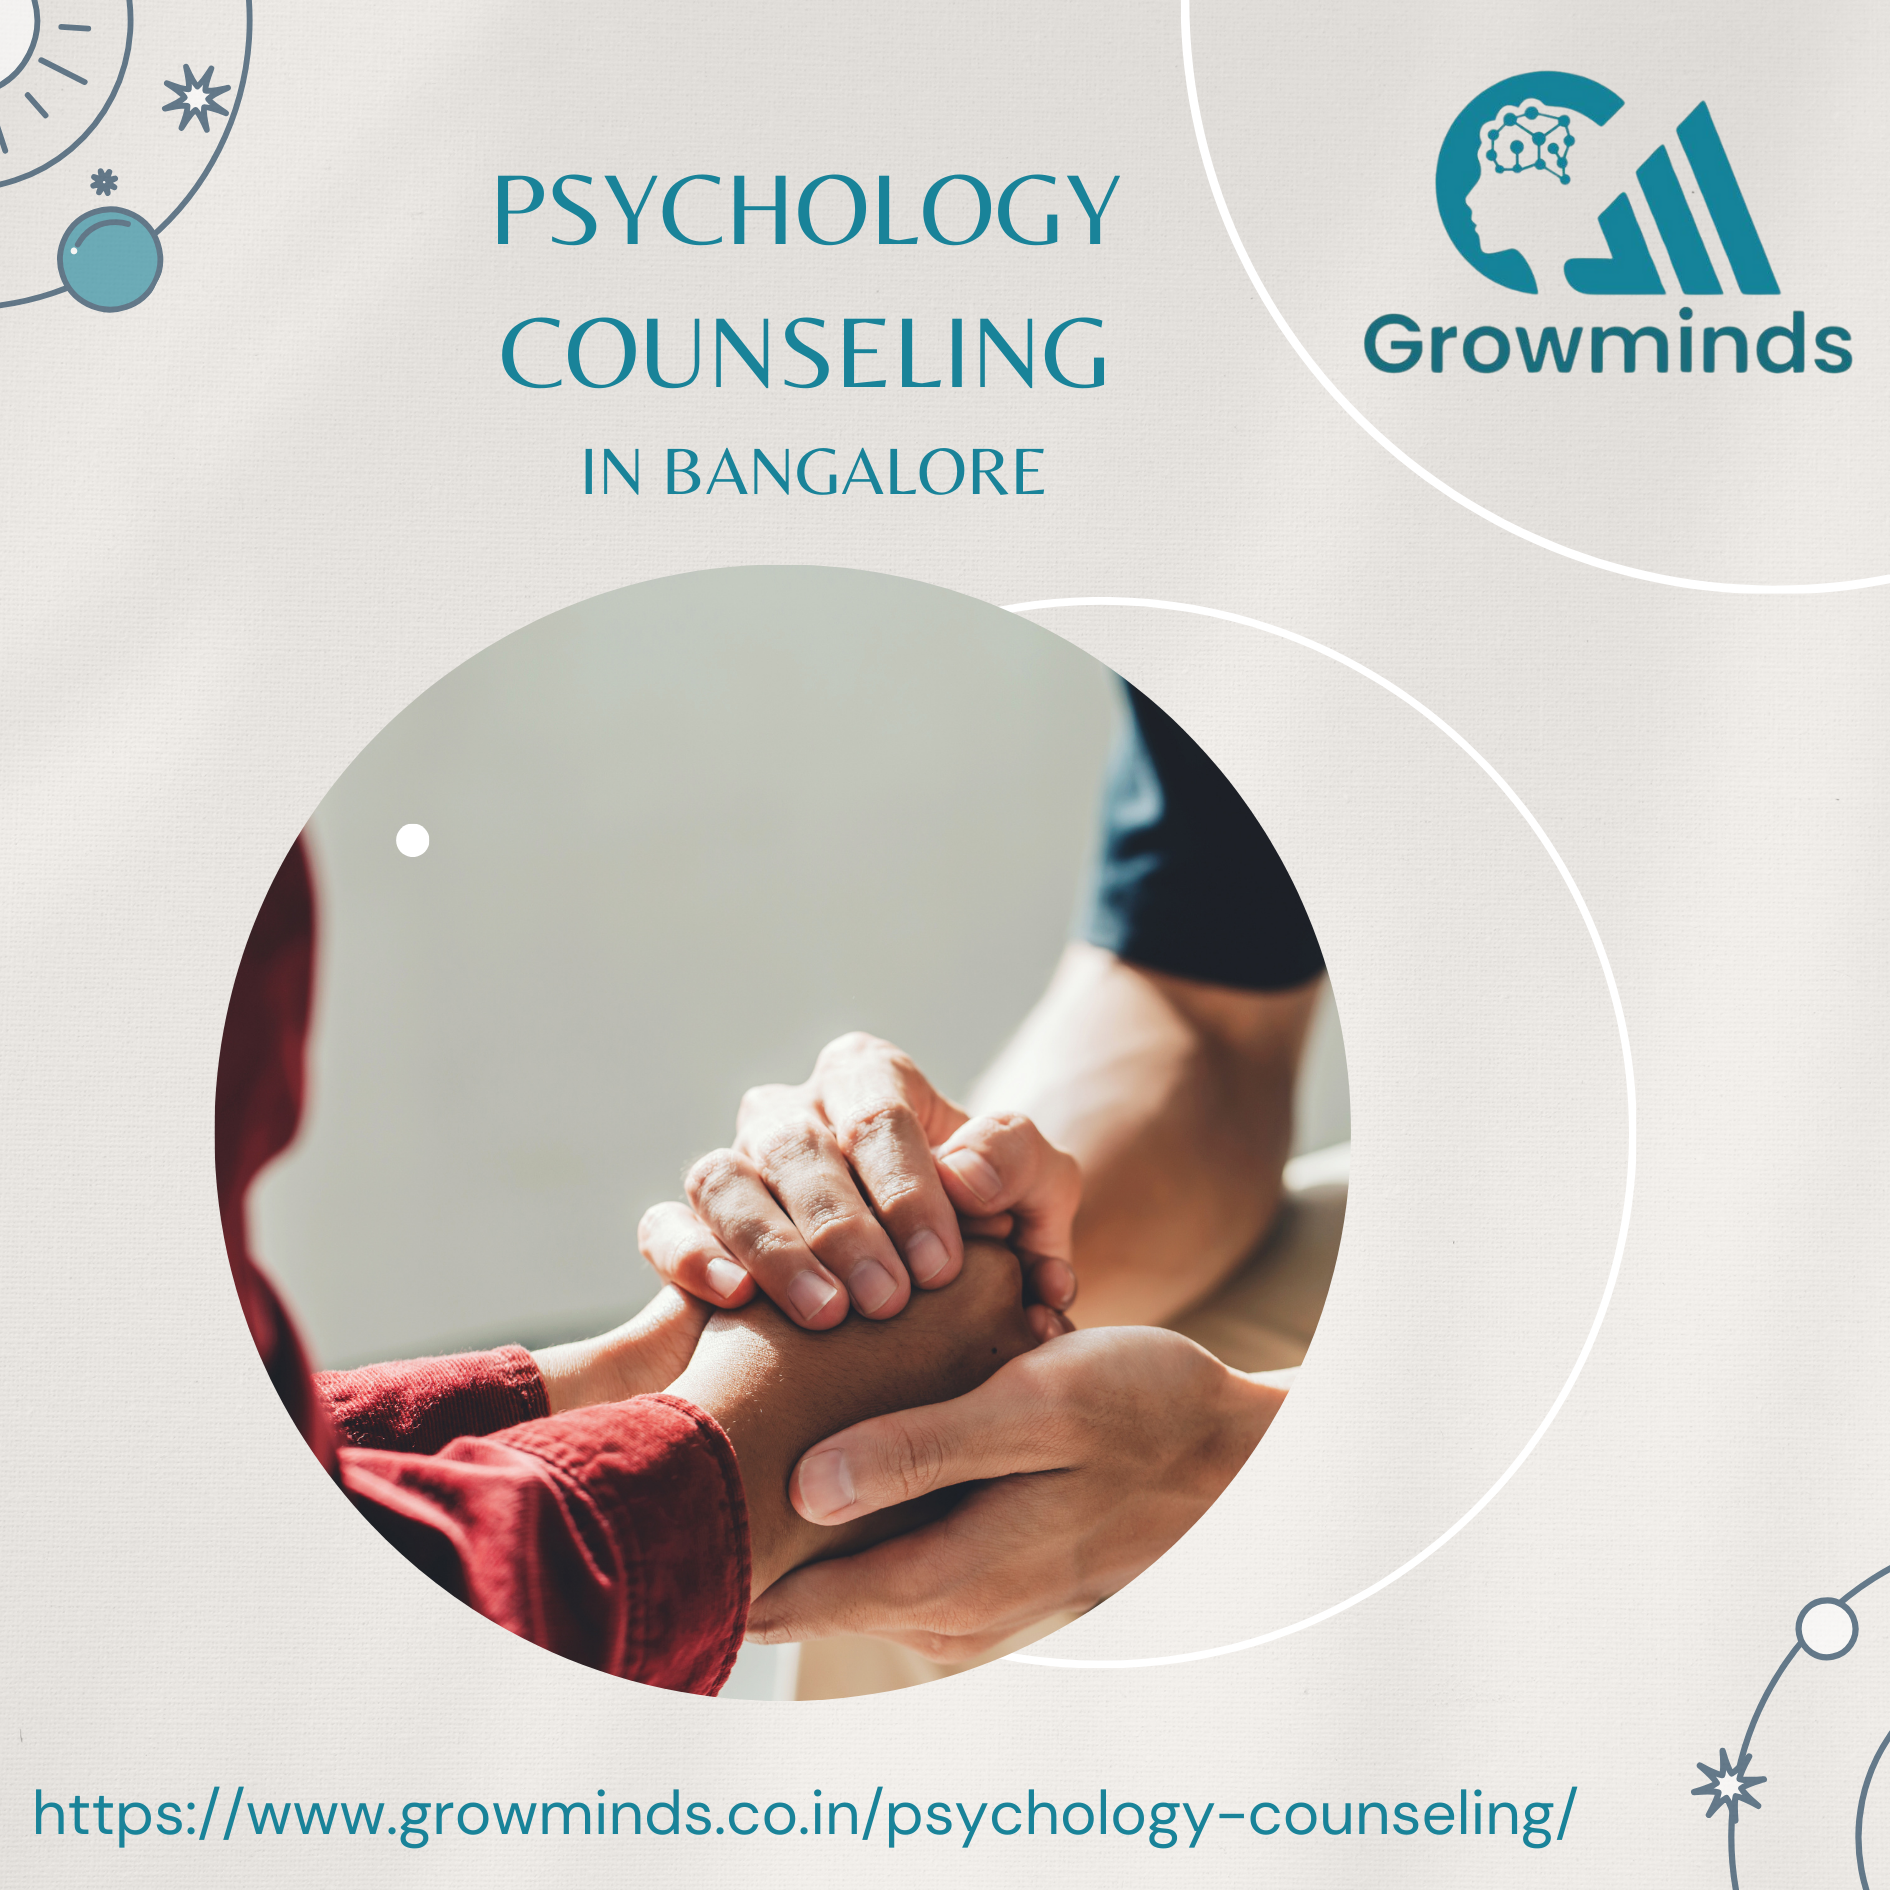 2 PSYCHOLOGY Ca

COUNSELING Growminds

IN BANGALORE

 

https://www.growminds.co.in/psychology-counseling/ £